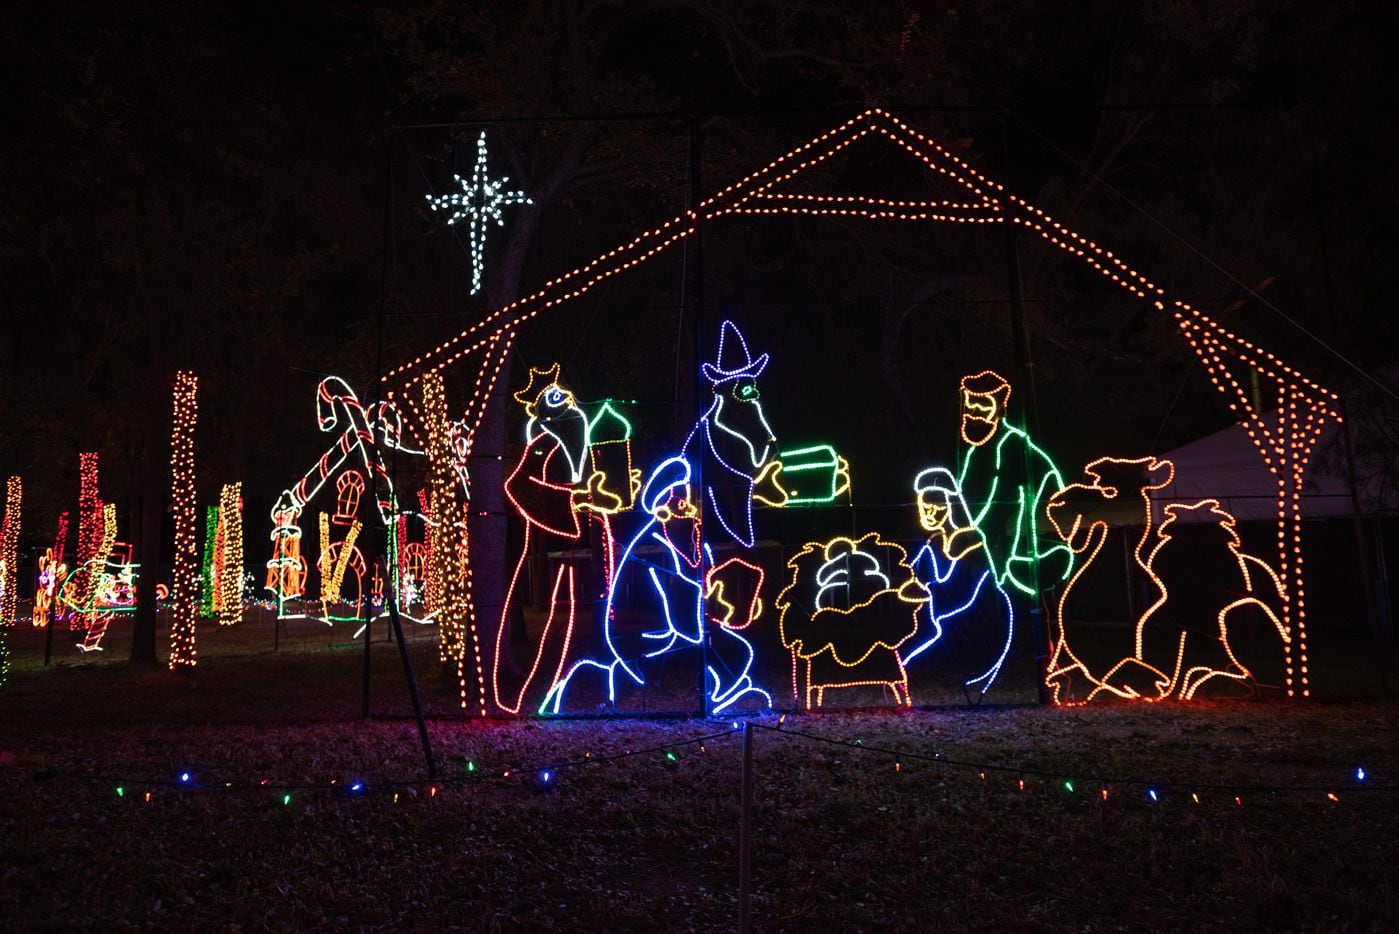 Prairie Lights drive-through holiday attraction has 4 million lights twinkling along a...